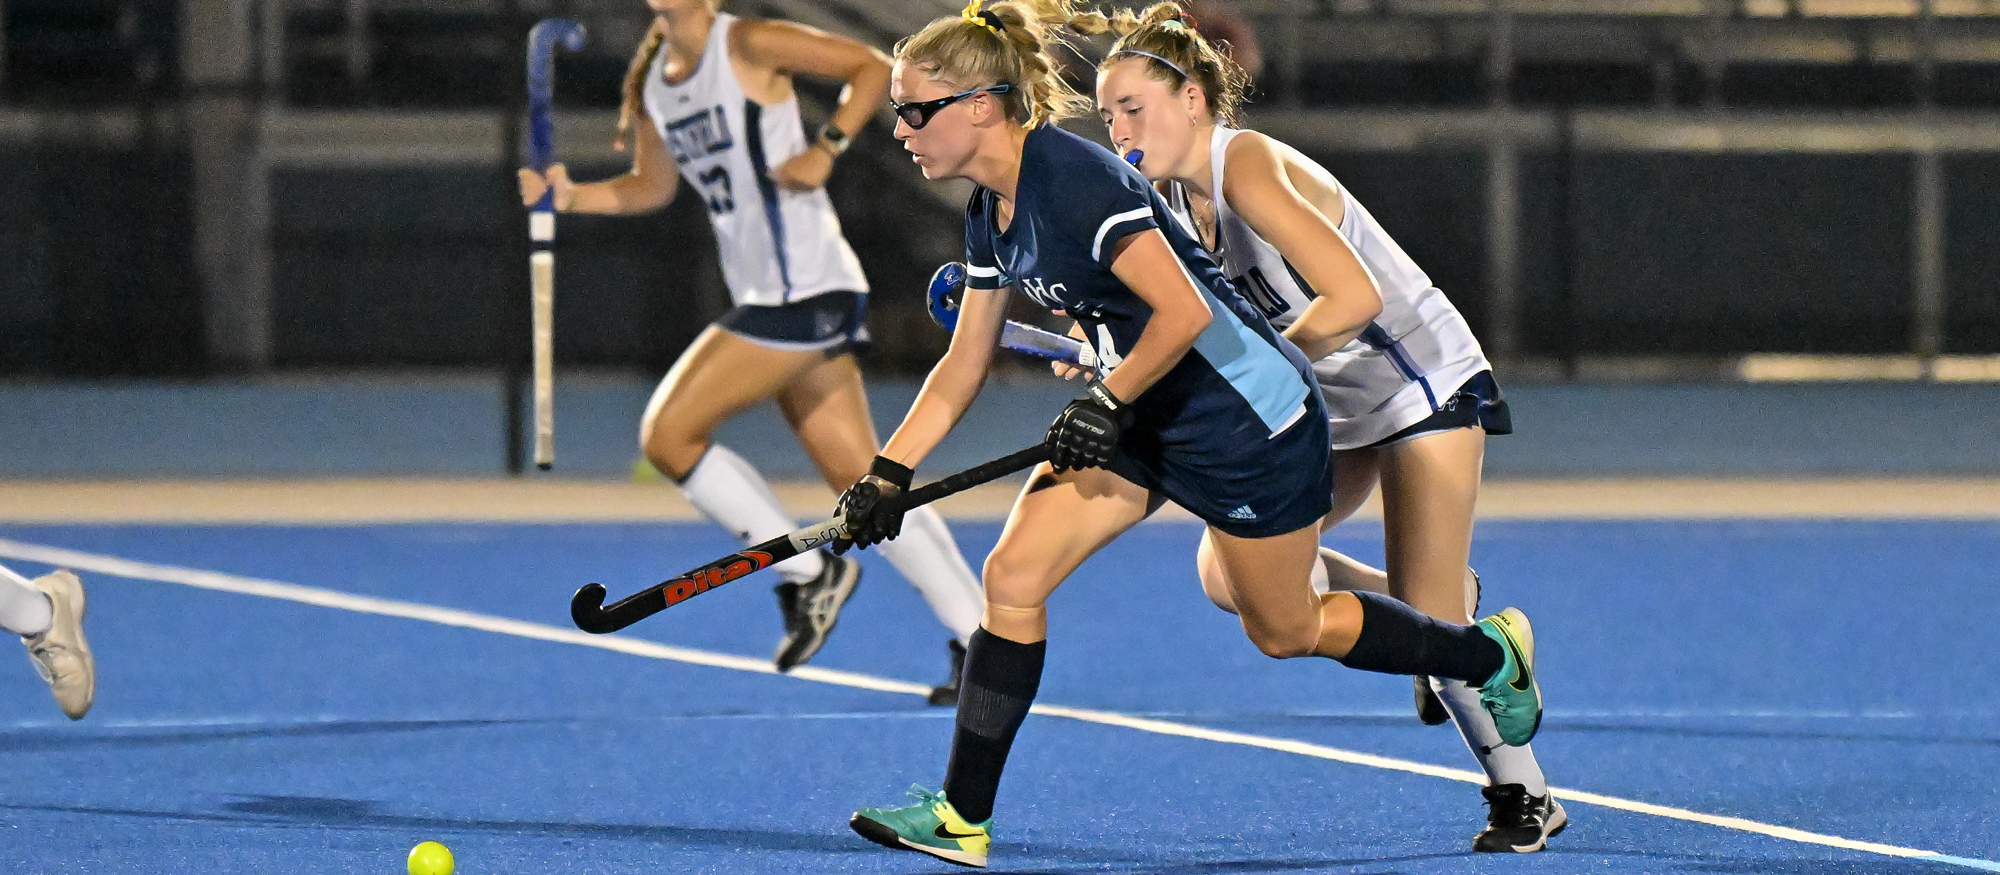 Jayonna Montigny scored two goals as Mount Holyoke defeated Springfield College 3-2 in overtime on Oct. 3, 2023. (RJB Sports file photo)